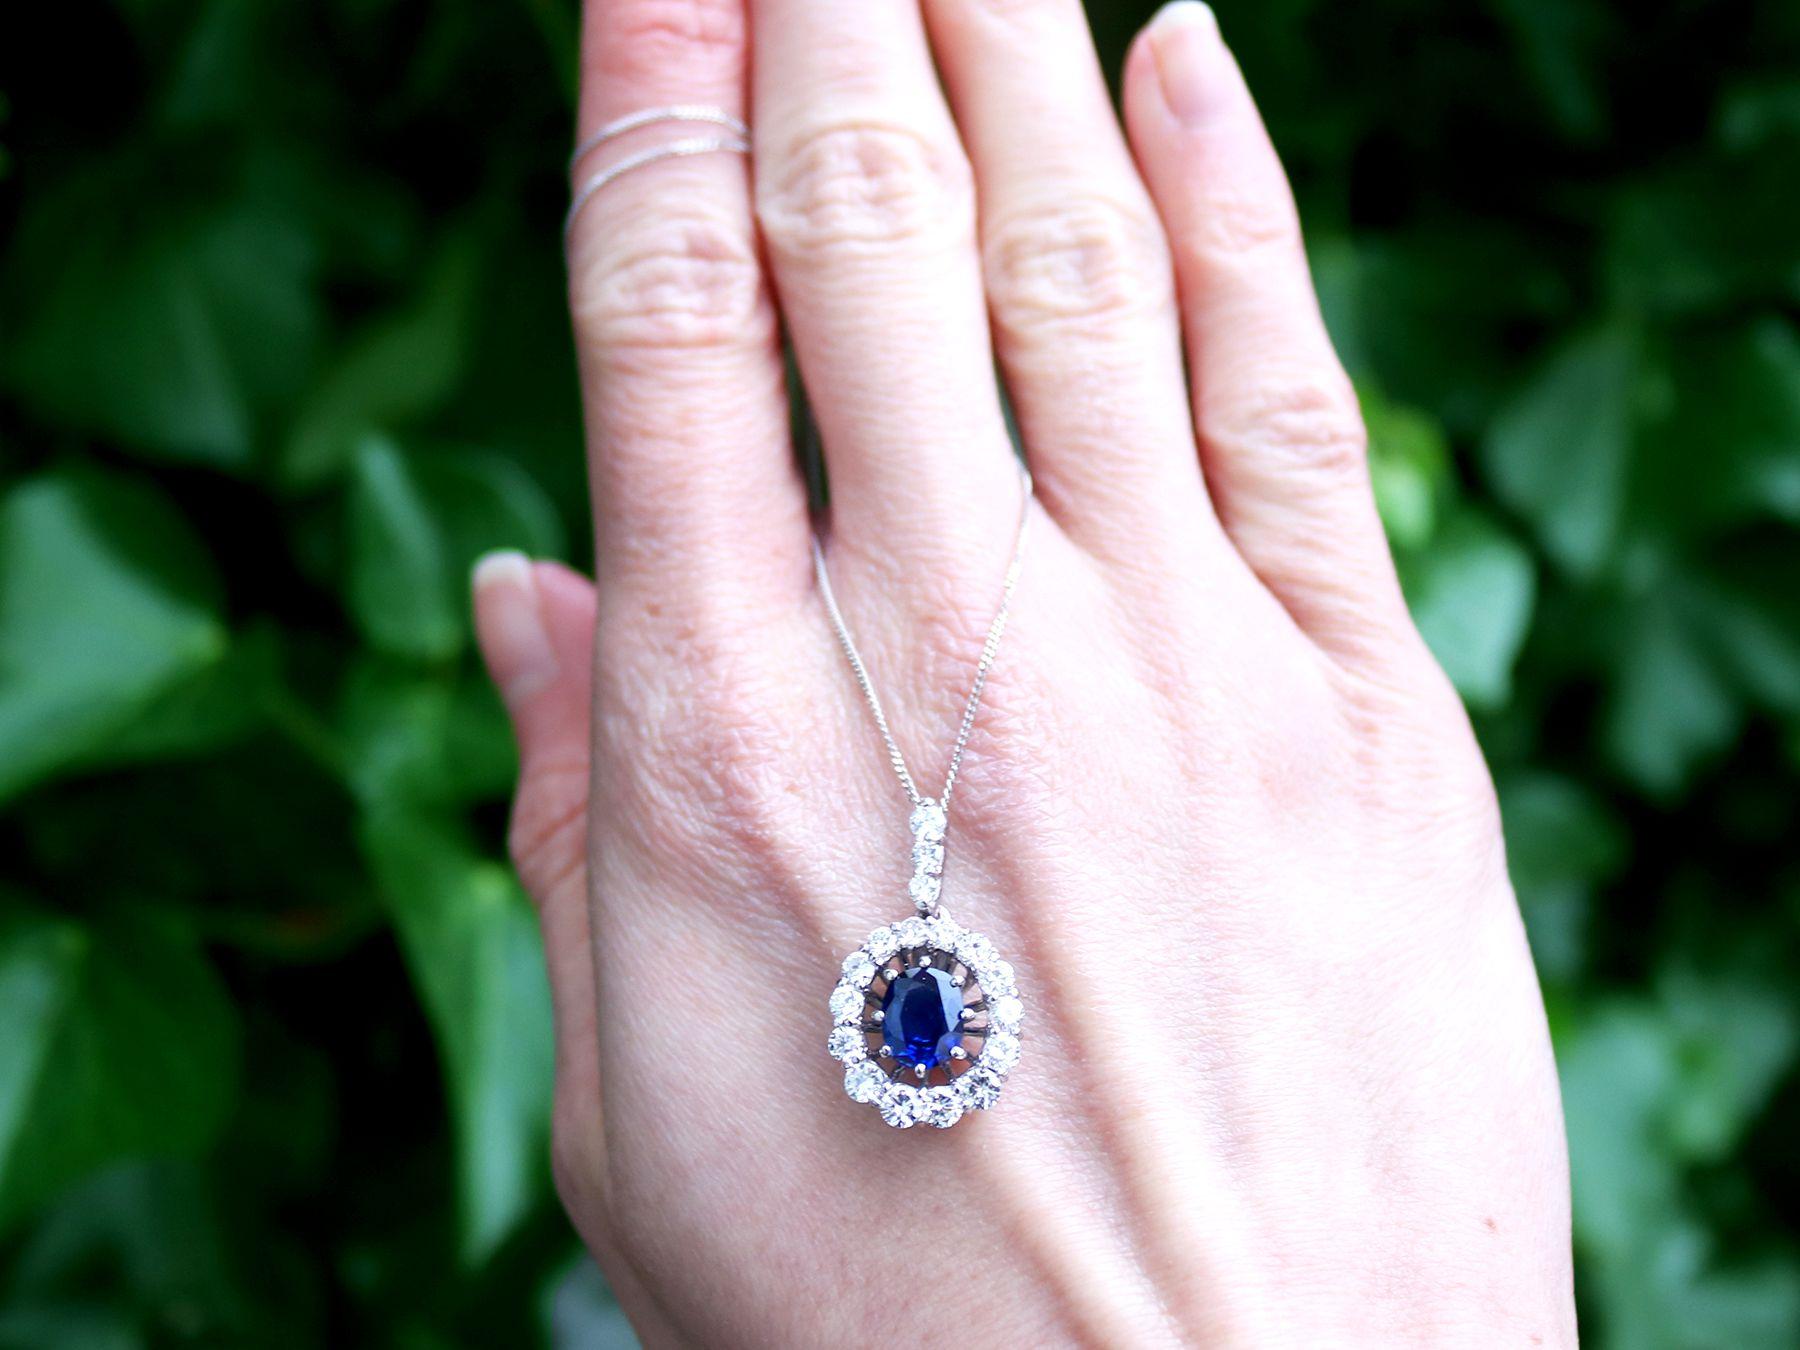 A stunning, fine and impressive 1.54 carat sapphire and 0.96 carat diamond, 18 karat white gold cluster pendant; an addition to our vintage jewelry and estate jewelry collections

This stunning, fine and impressive vintage pendant has been crafted